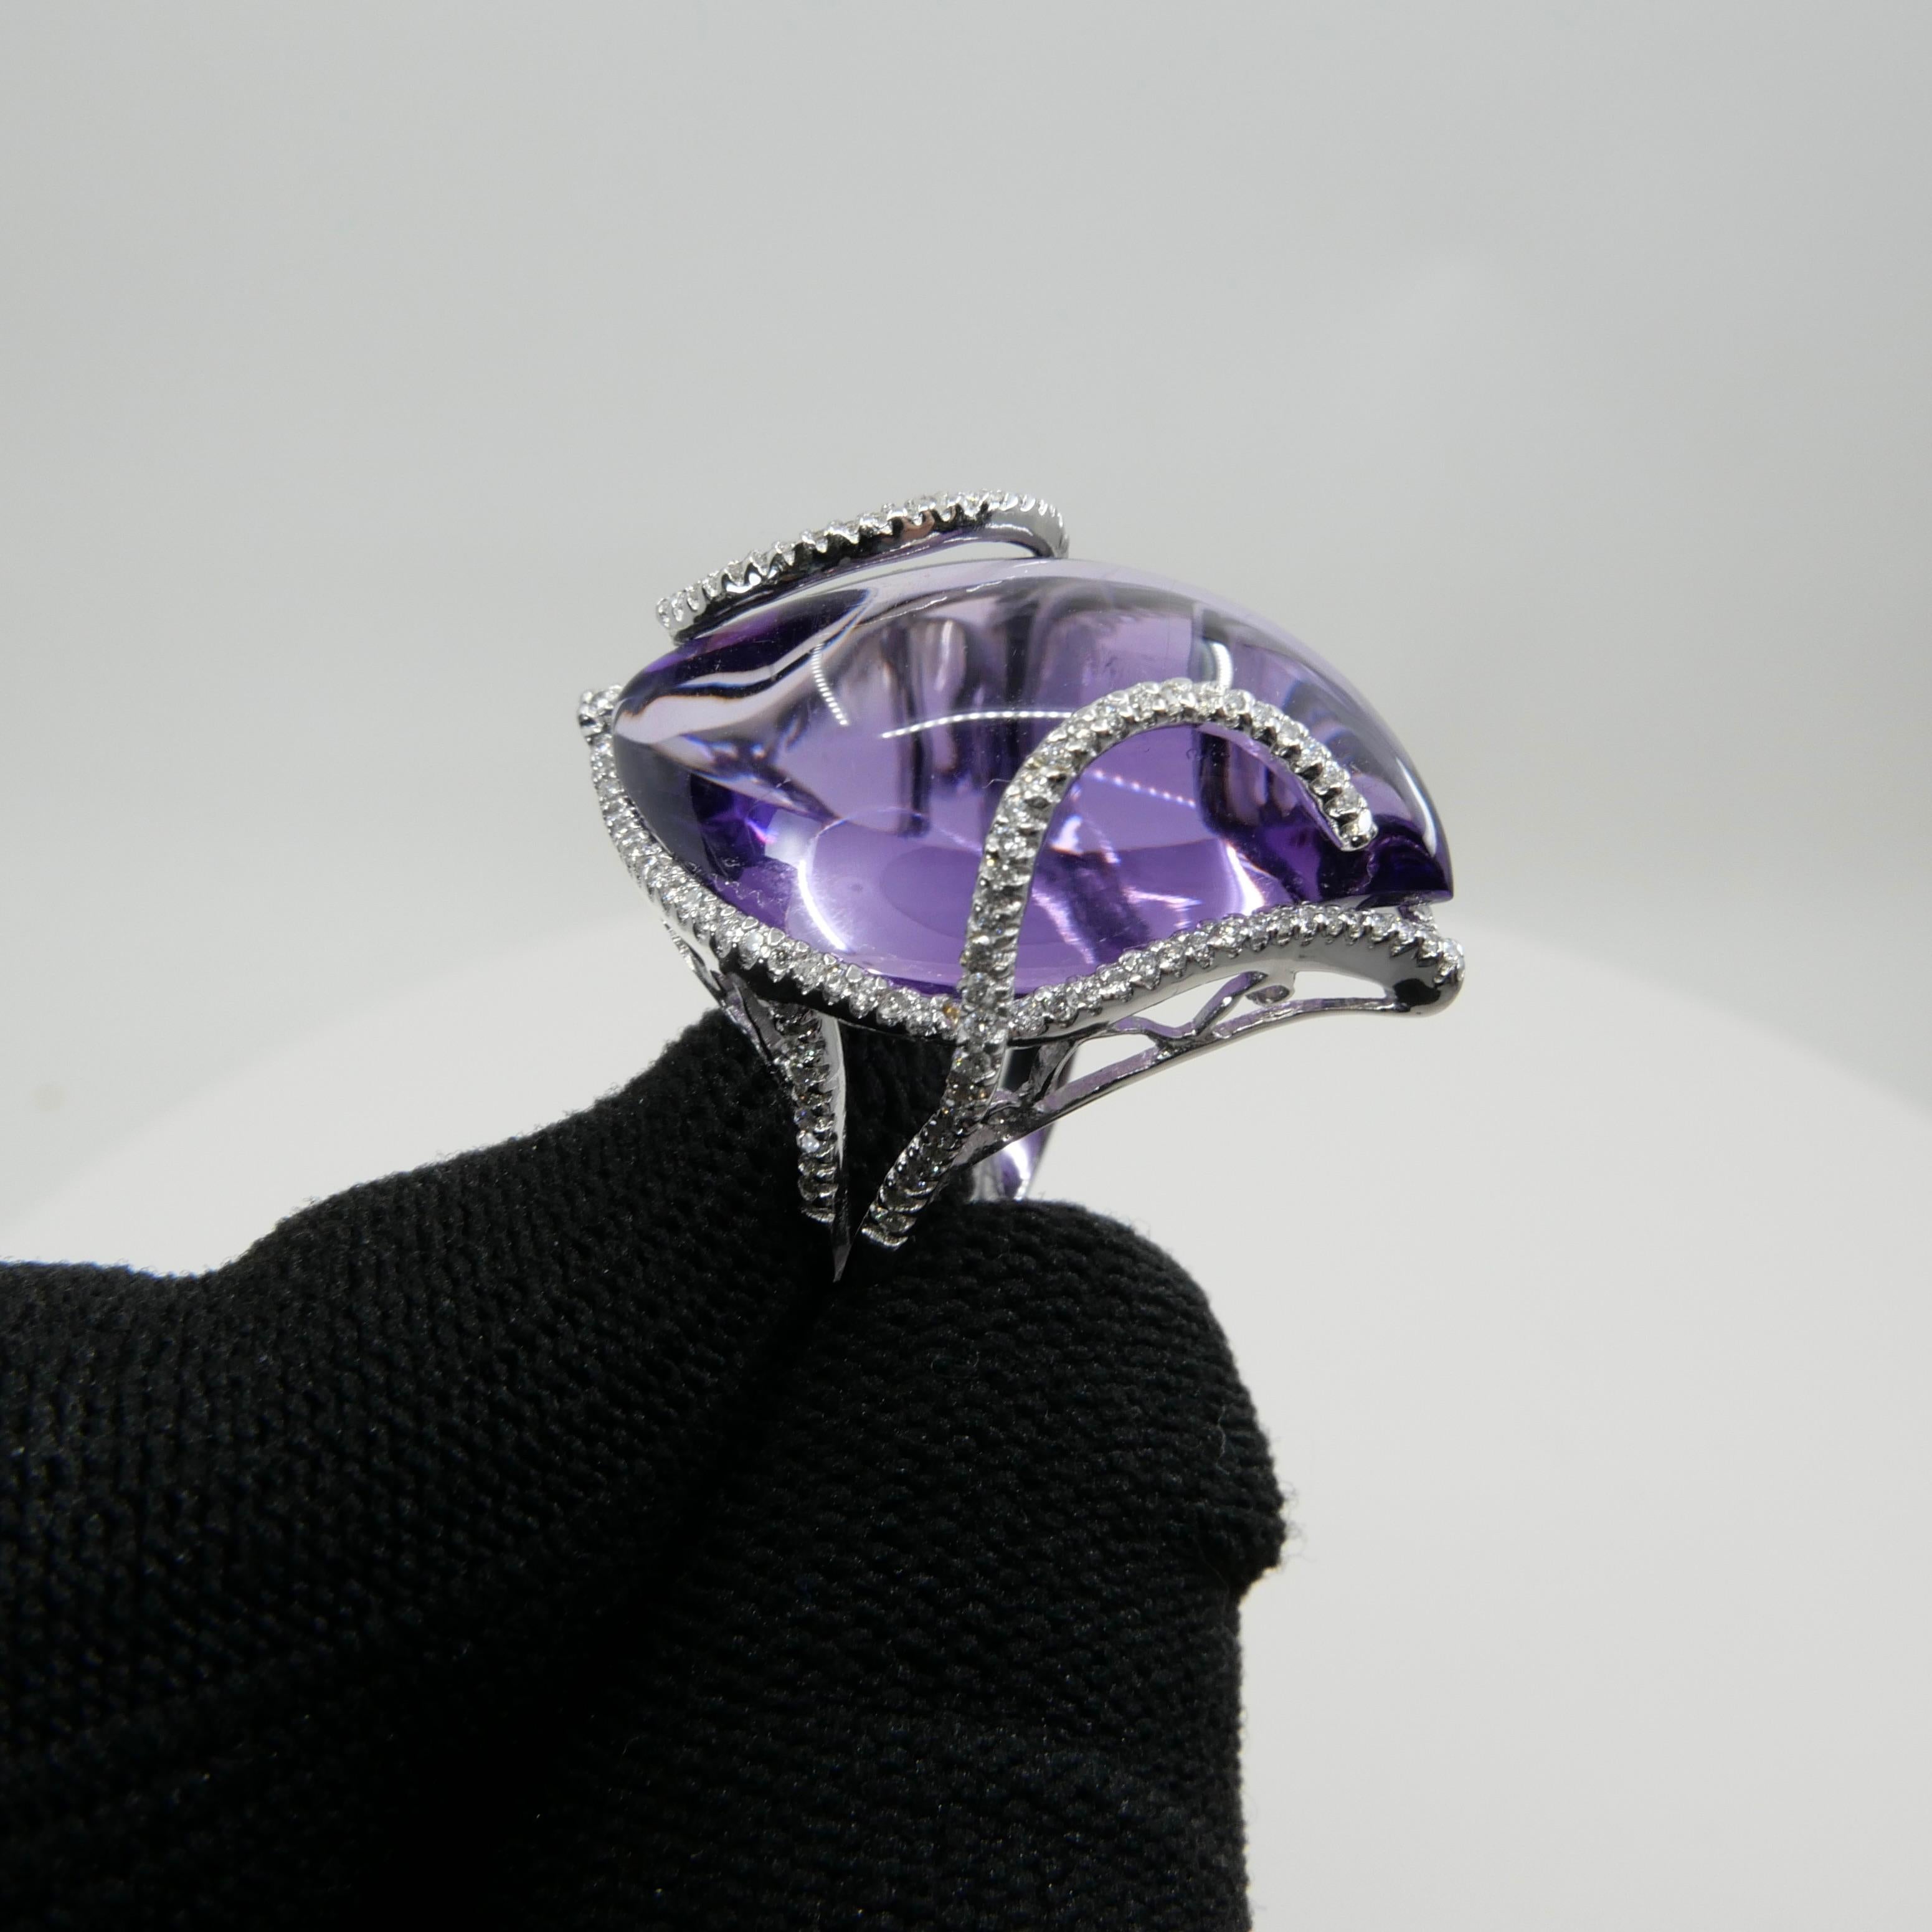 23 Carat Amethyst & Diamond Cocktail Ring. Large Contemporary Statement Ring.    For Sale 12